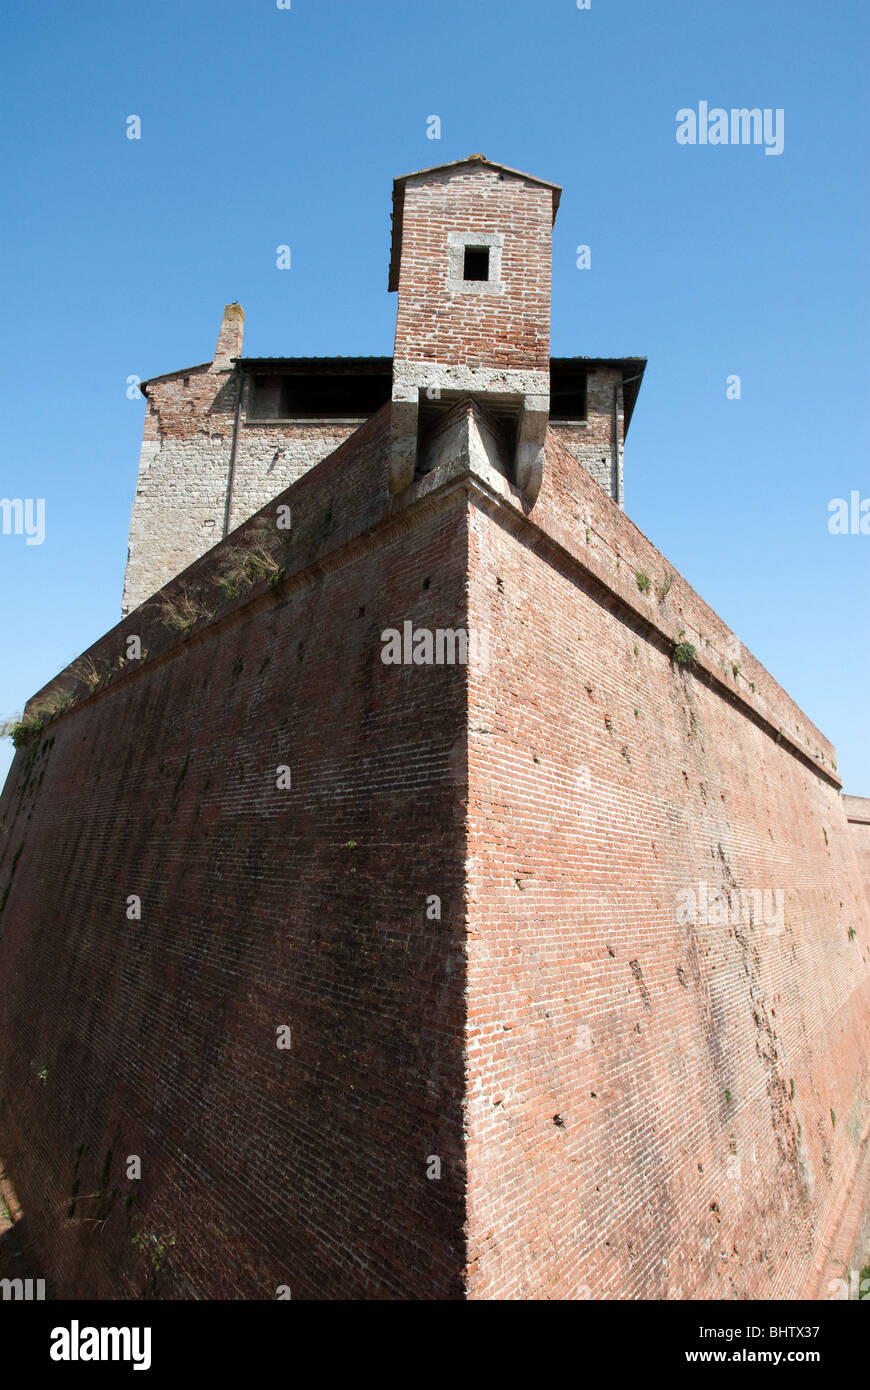 Walls of the Medici Fortress in the town of Grosseto, Italy Stock Photo